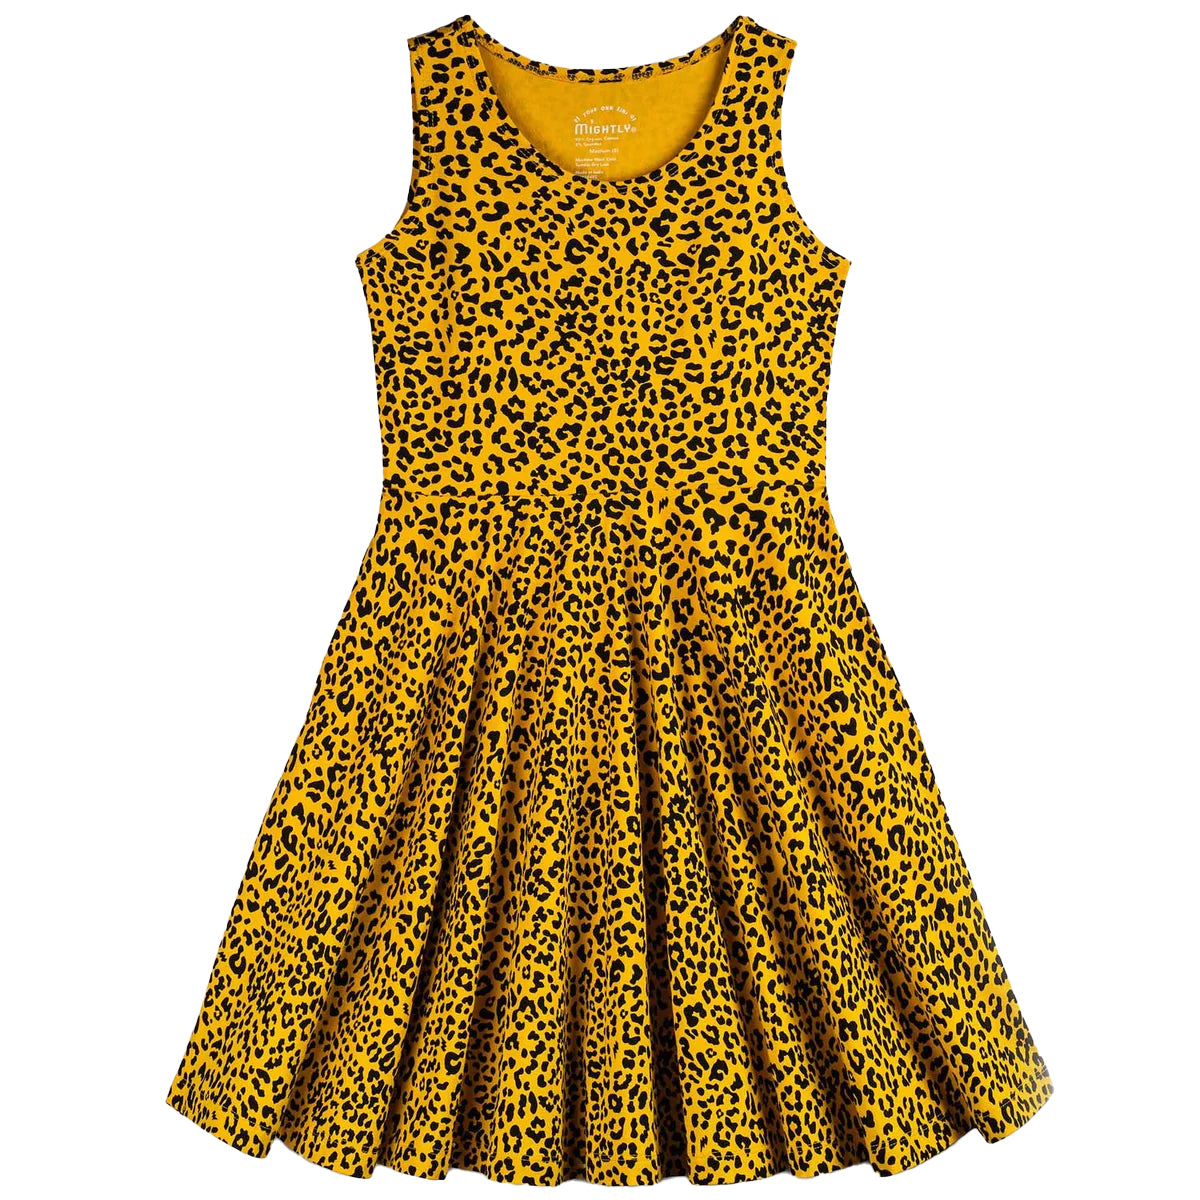 Pre-owned Gold Leopard Dress size: 2-5T